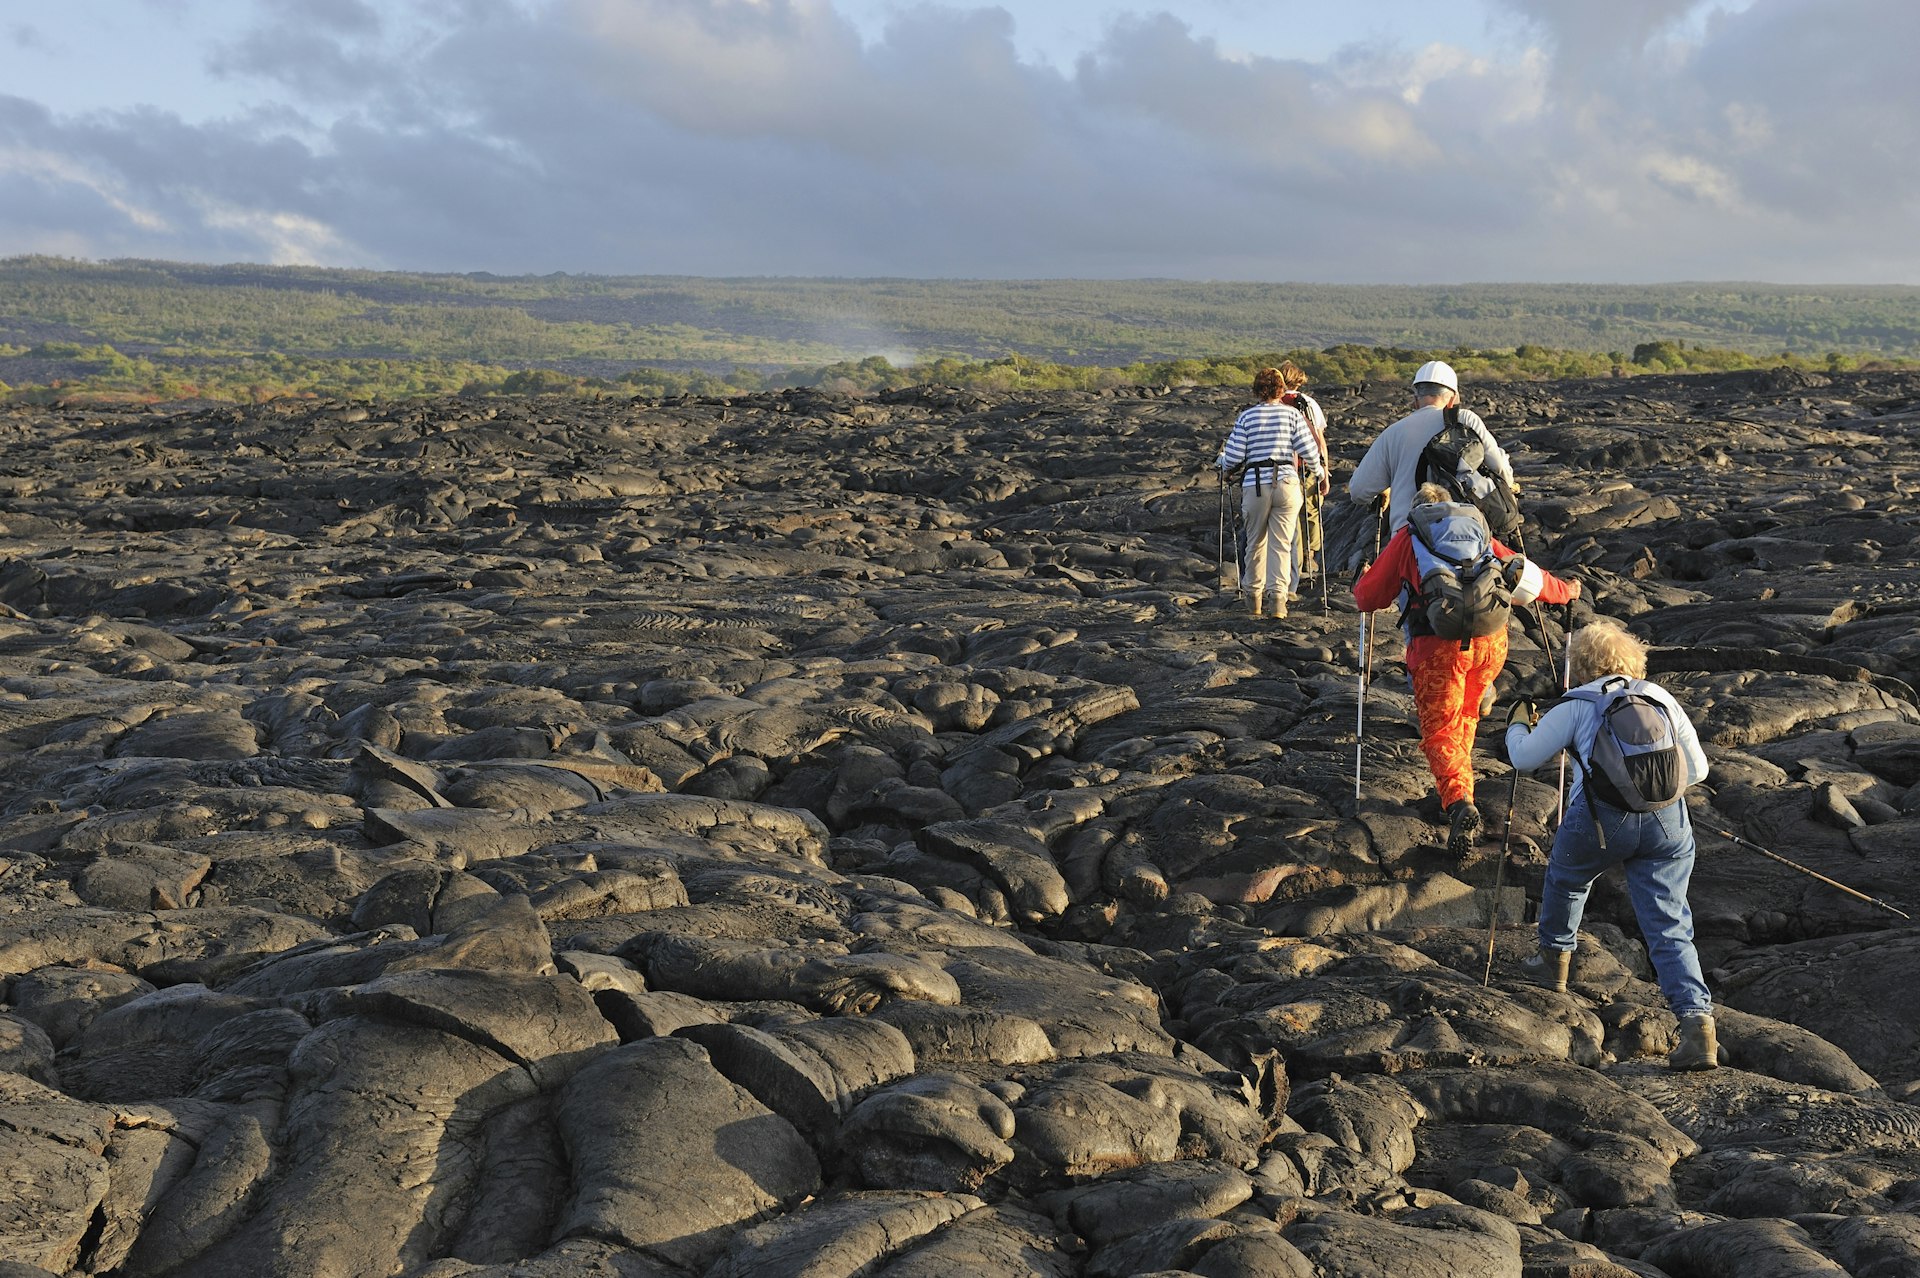 Group of hikers walking on cooled lava flow in Hawaii. 